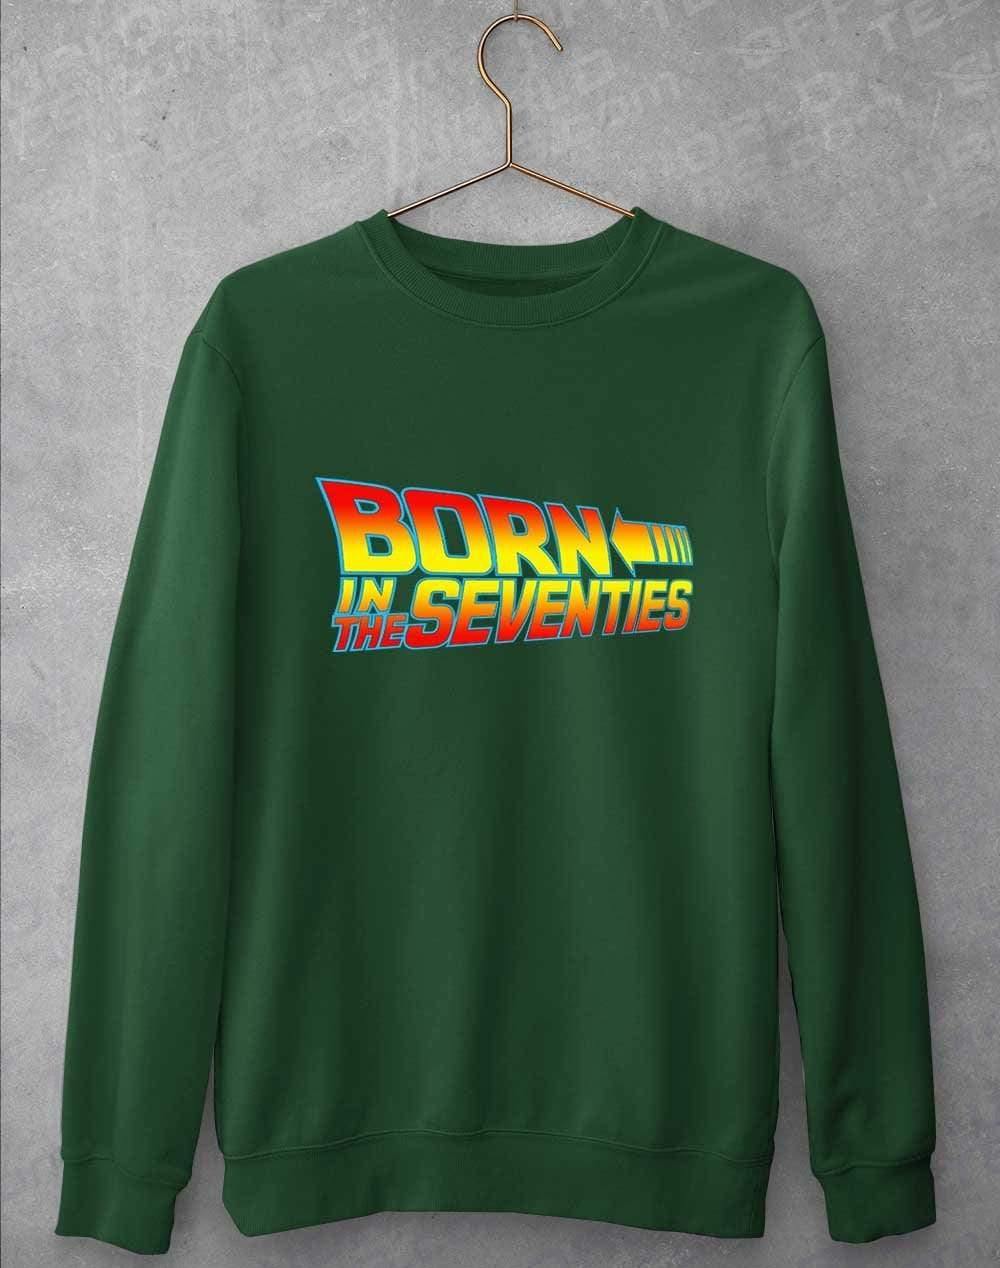 Born in the... (CHOOSE YOUR DECADE!) Sweatshirt 1970s - Bottle Green / S  - Off World Tees